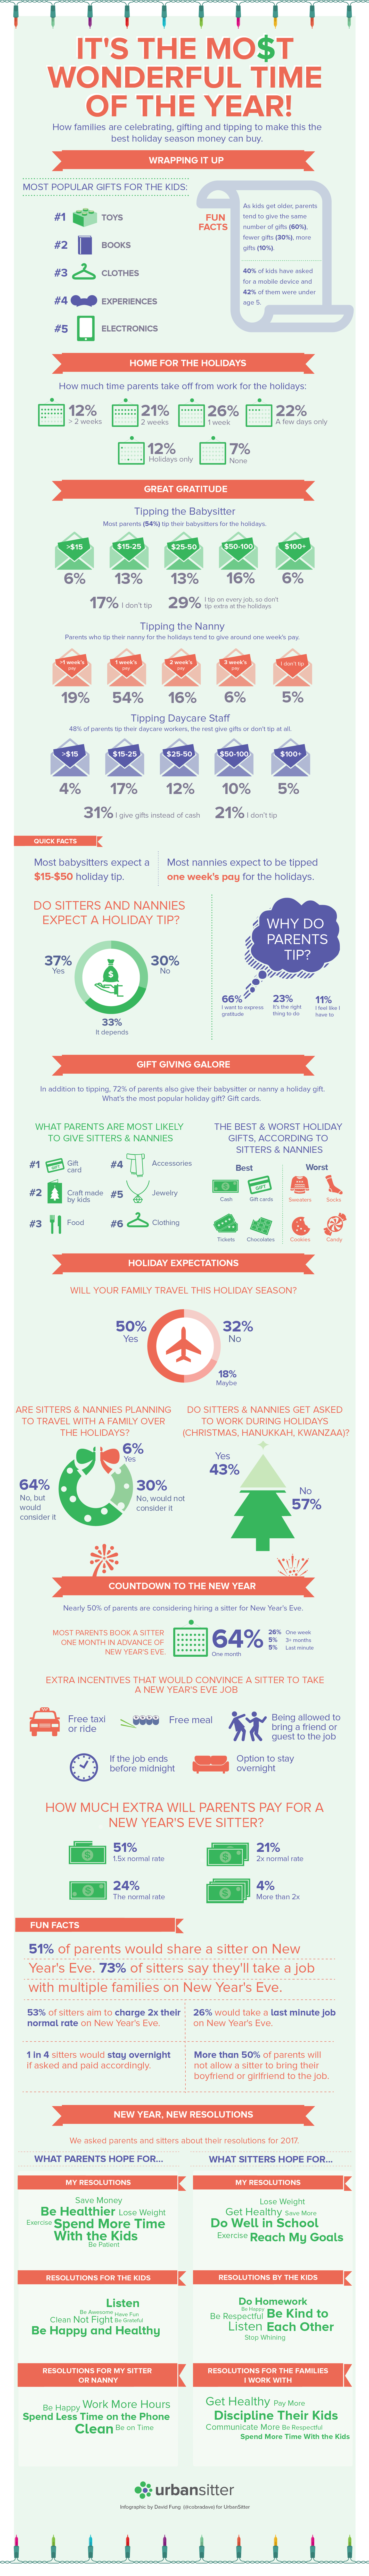 2016-holiday-tipping-nye-infographic-logo